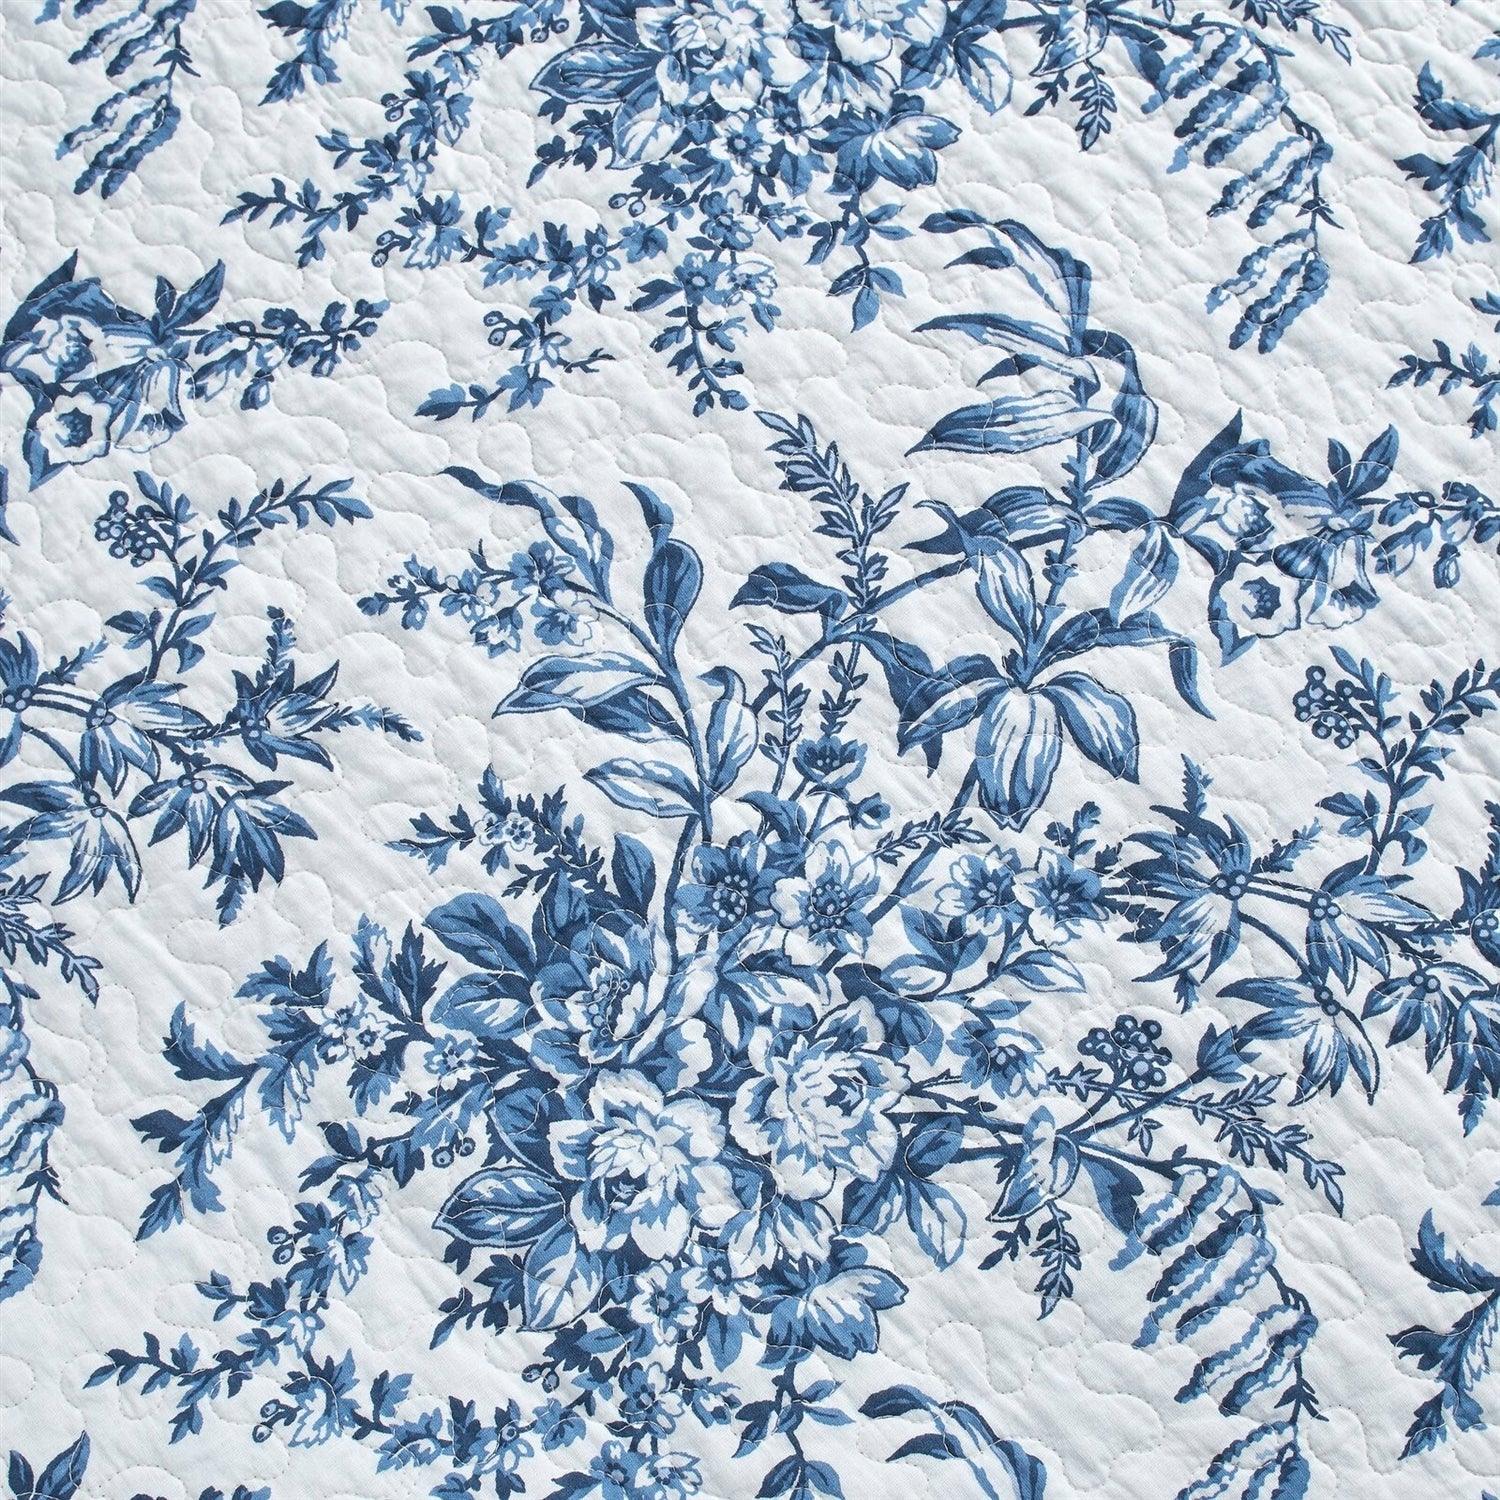 King size 3 Piece Bed-in-a-Bag Reversible Blue White Floral Cotton Quilt Set